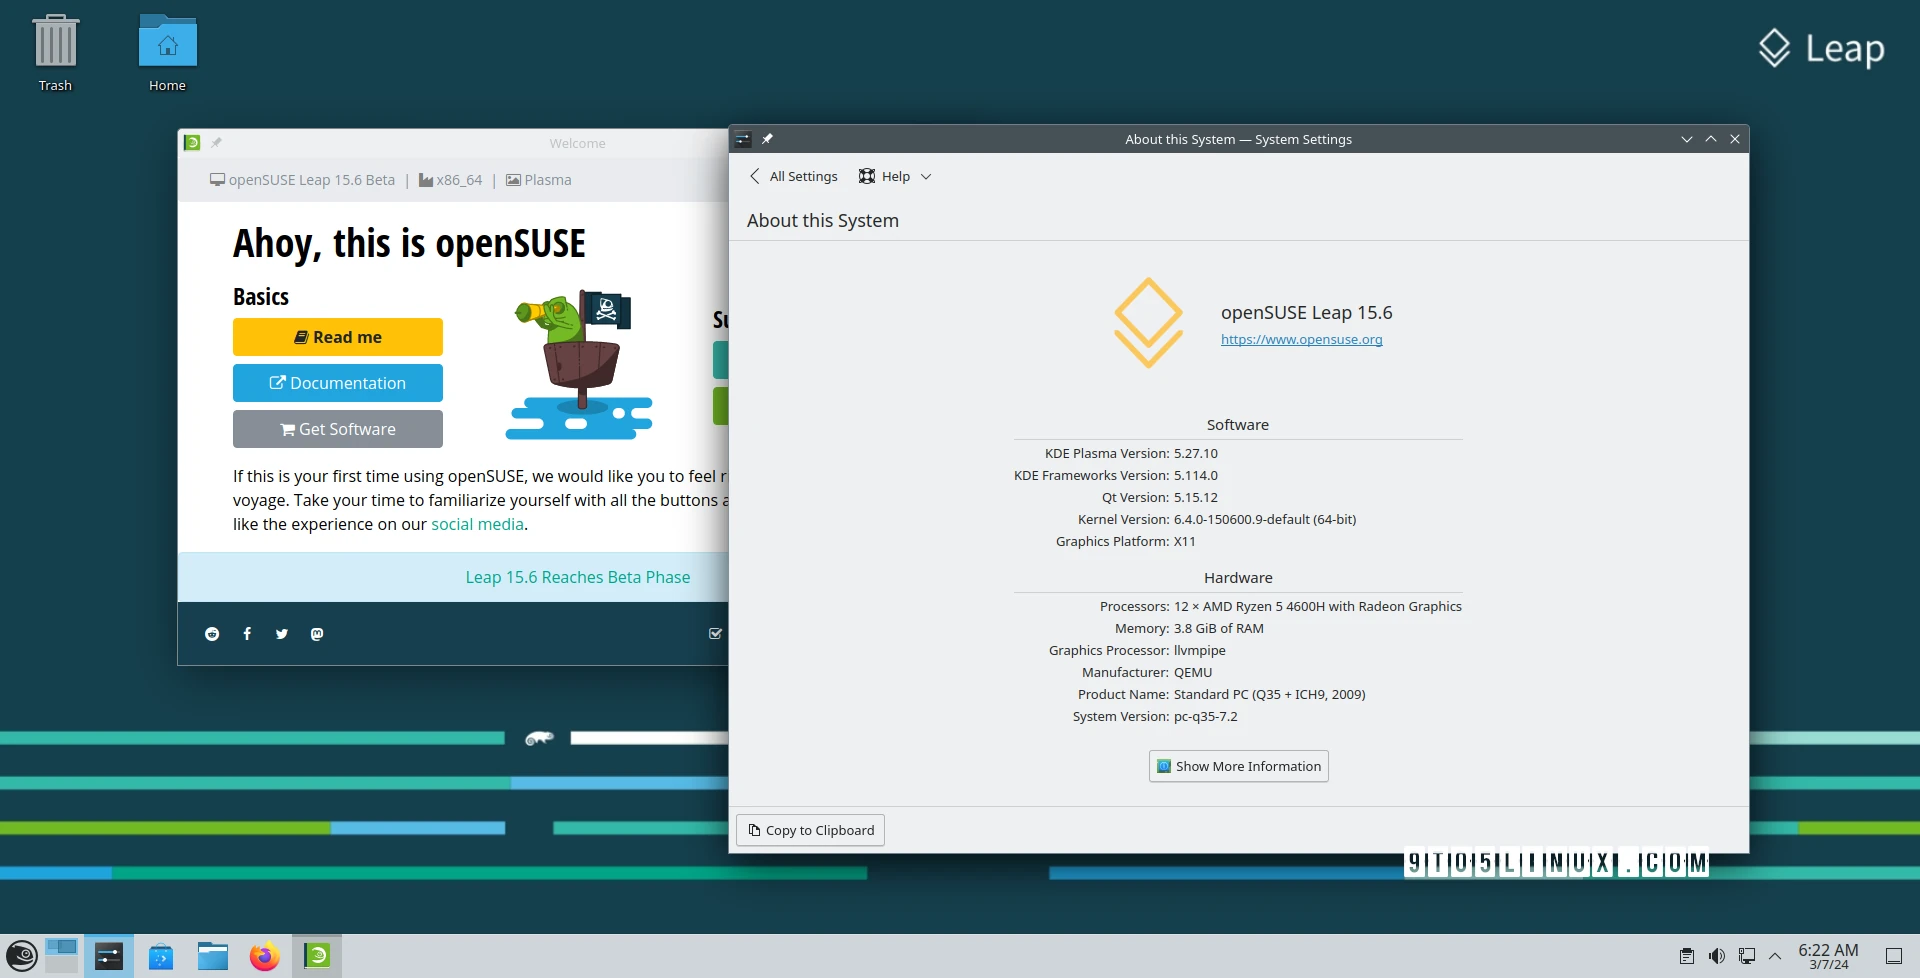 openSUSE Leap 15.6 Is Now Available for Public Beta Testing with GNOME 45